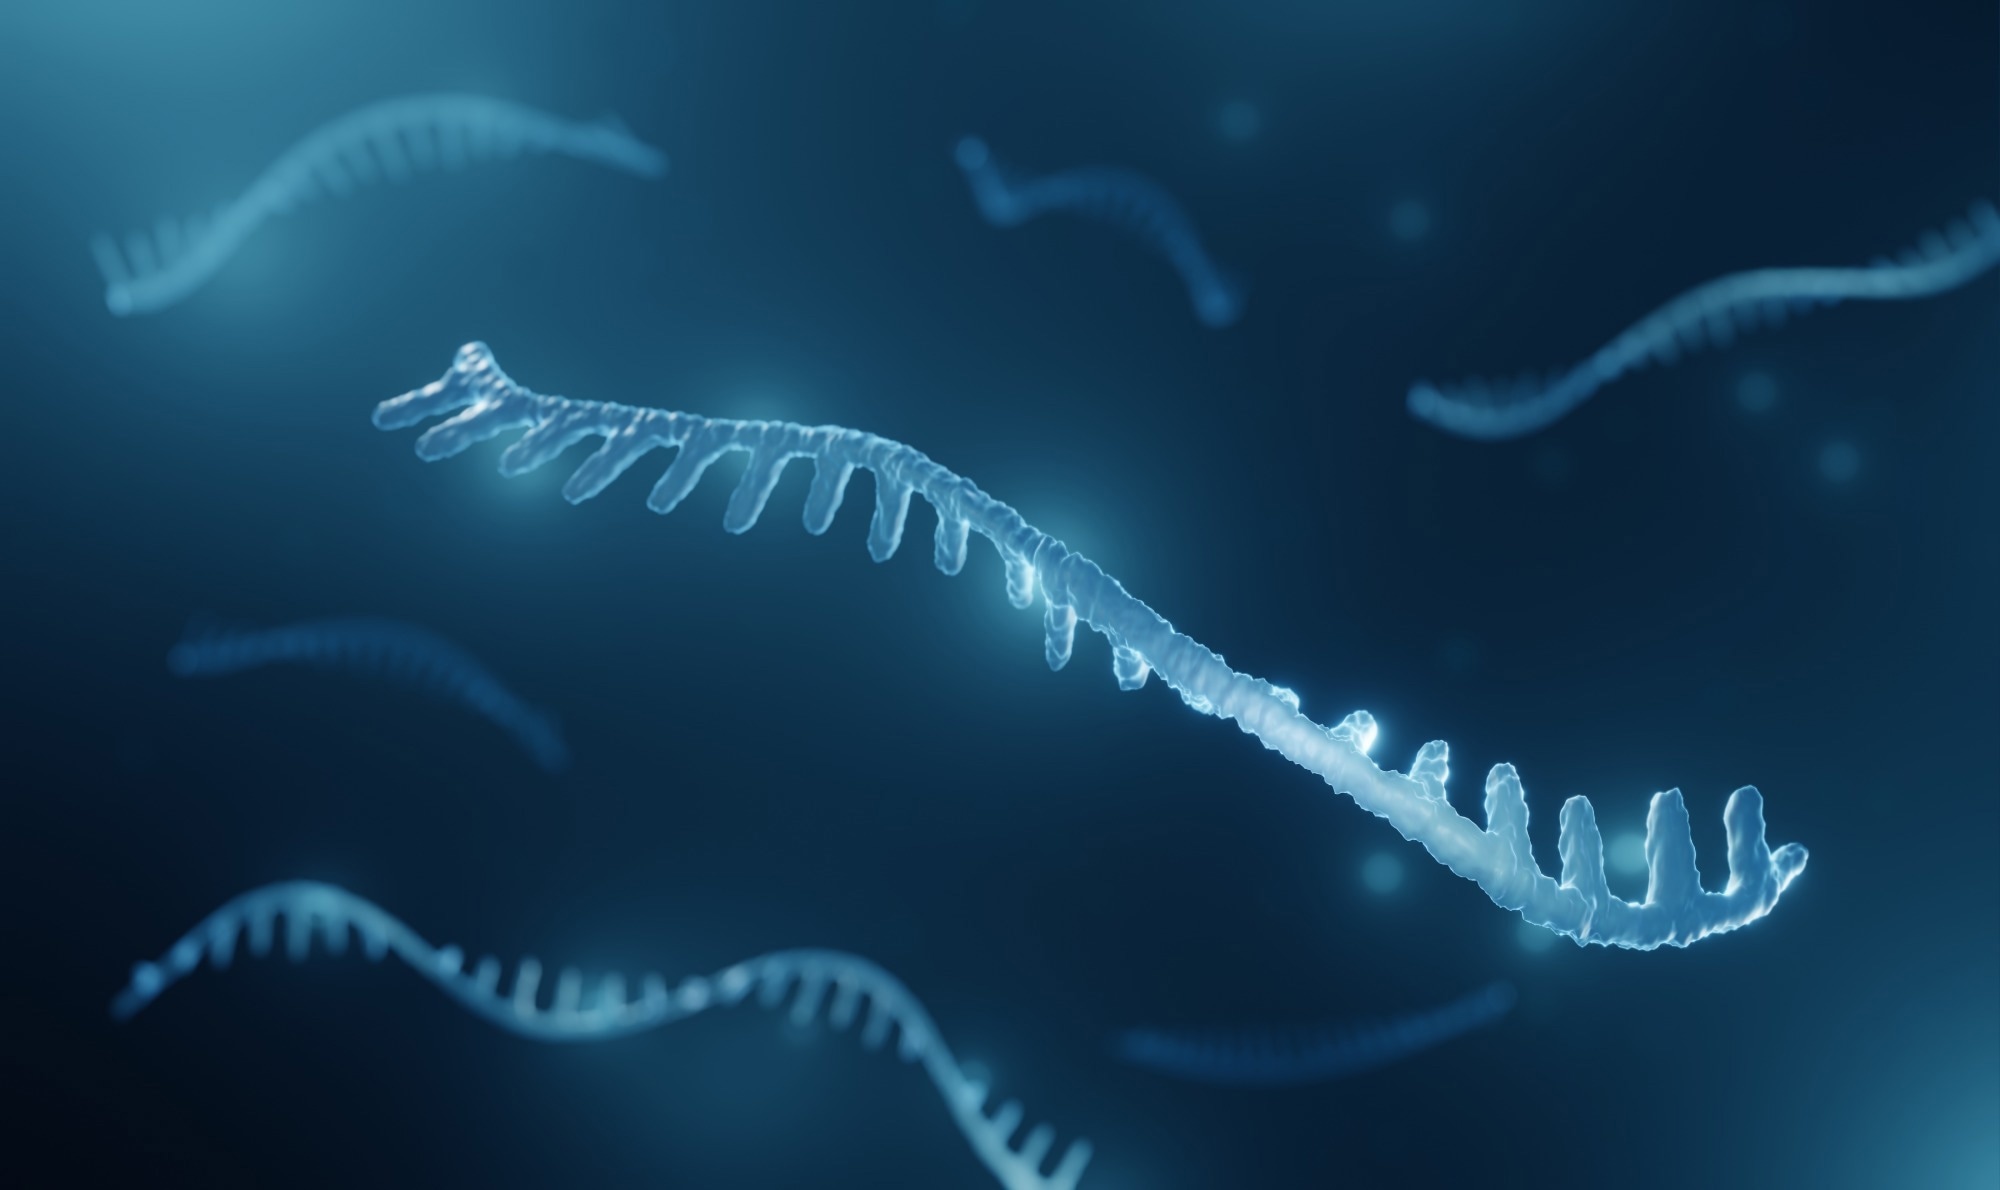 Study: Dietary Epigenetic Modulators: Unravelling the Still-Controversial Benefits of miRNAs in Nutrition and Disease. Image Credit: ART-ur/Shutterstock.com